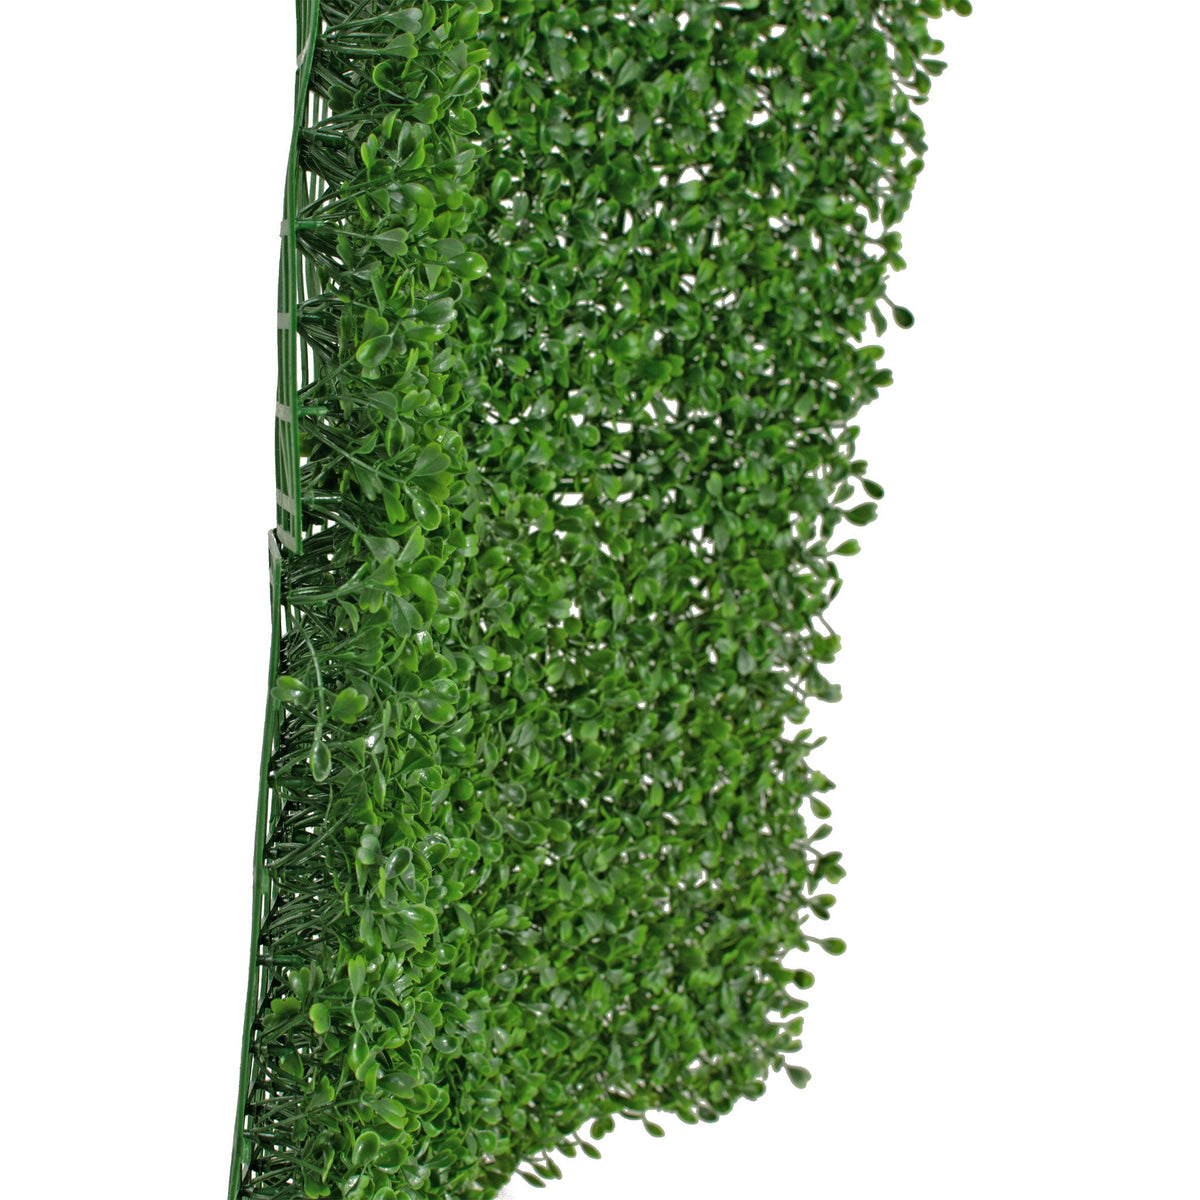 Indoor and Outdoor use with Commercial Grade UV Resistant Embedded Foliage.